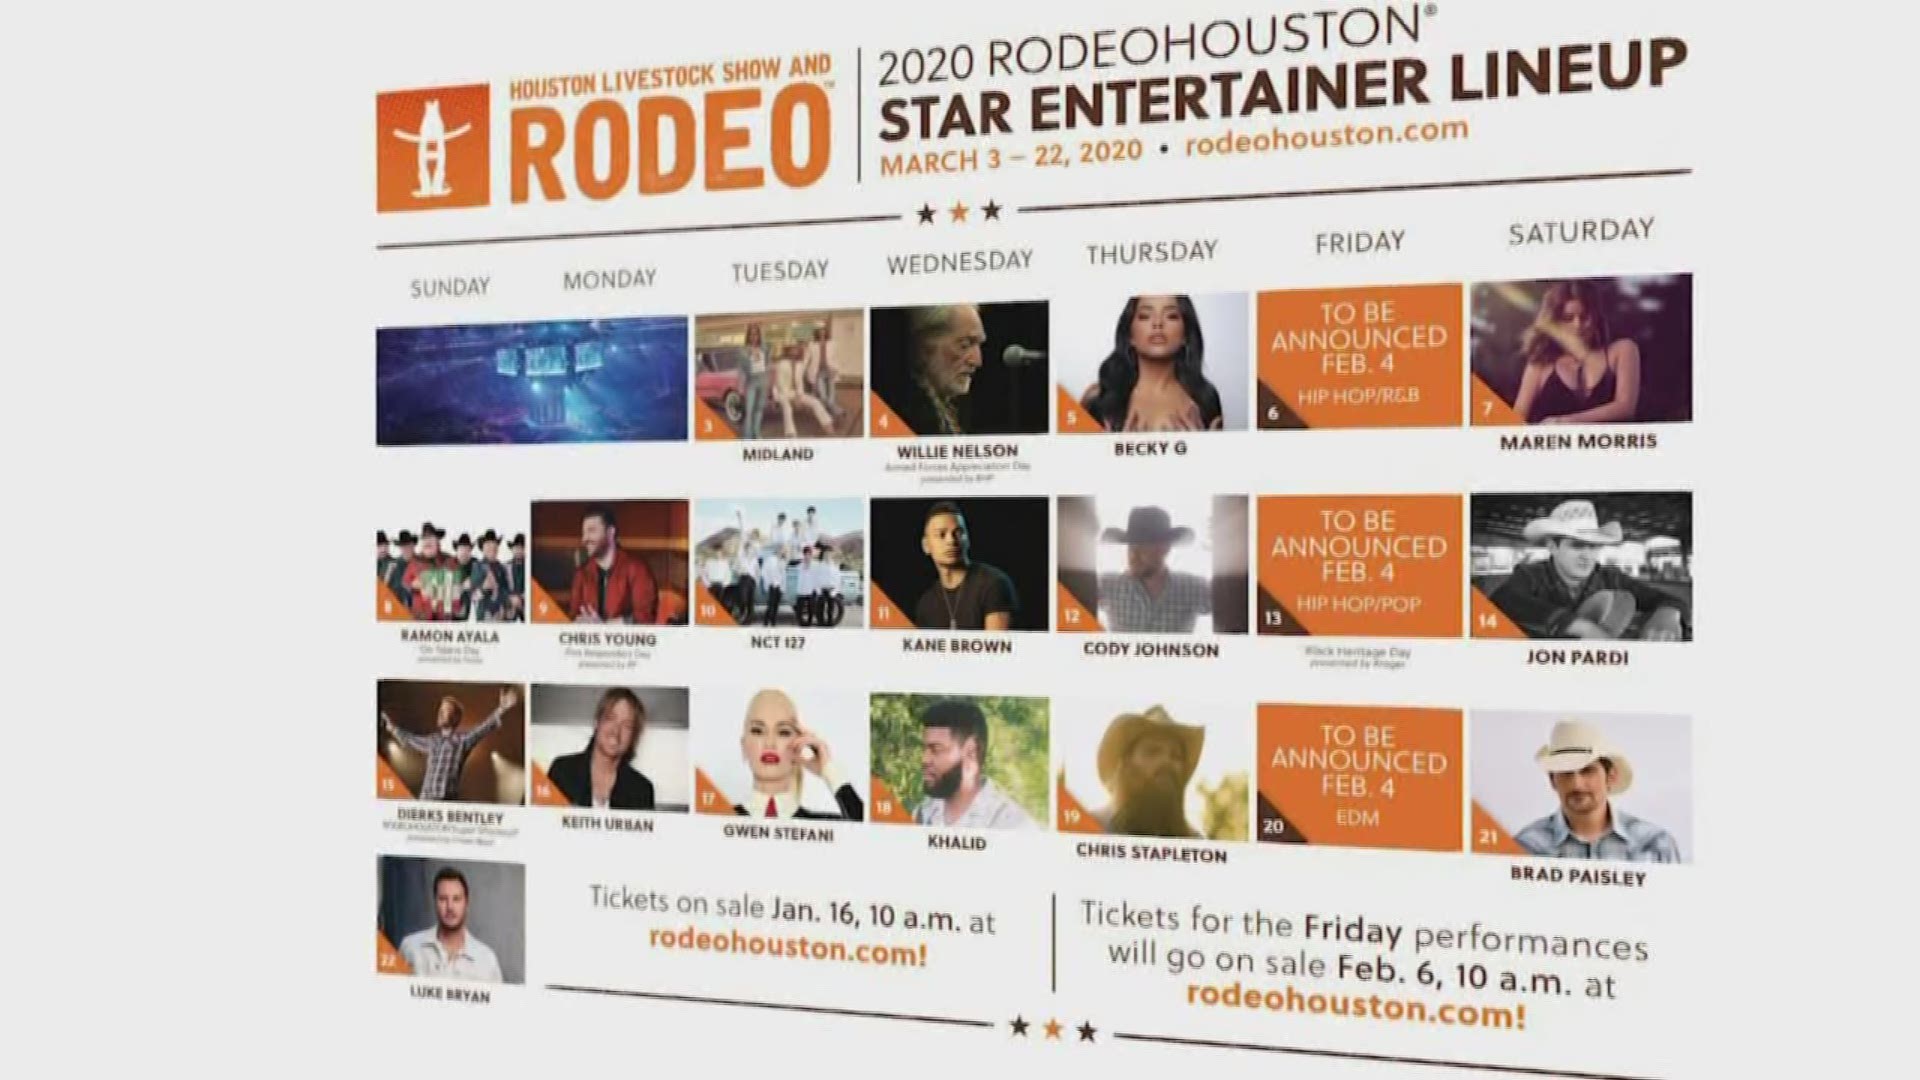 Tickets for 17 RodeoHouston performances are on sale. However, many fans got online to buy tickets Thursday only to learn they could only purchase upper level seats.